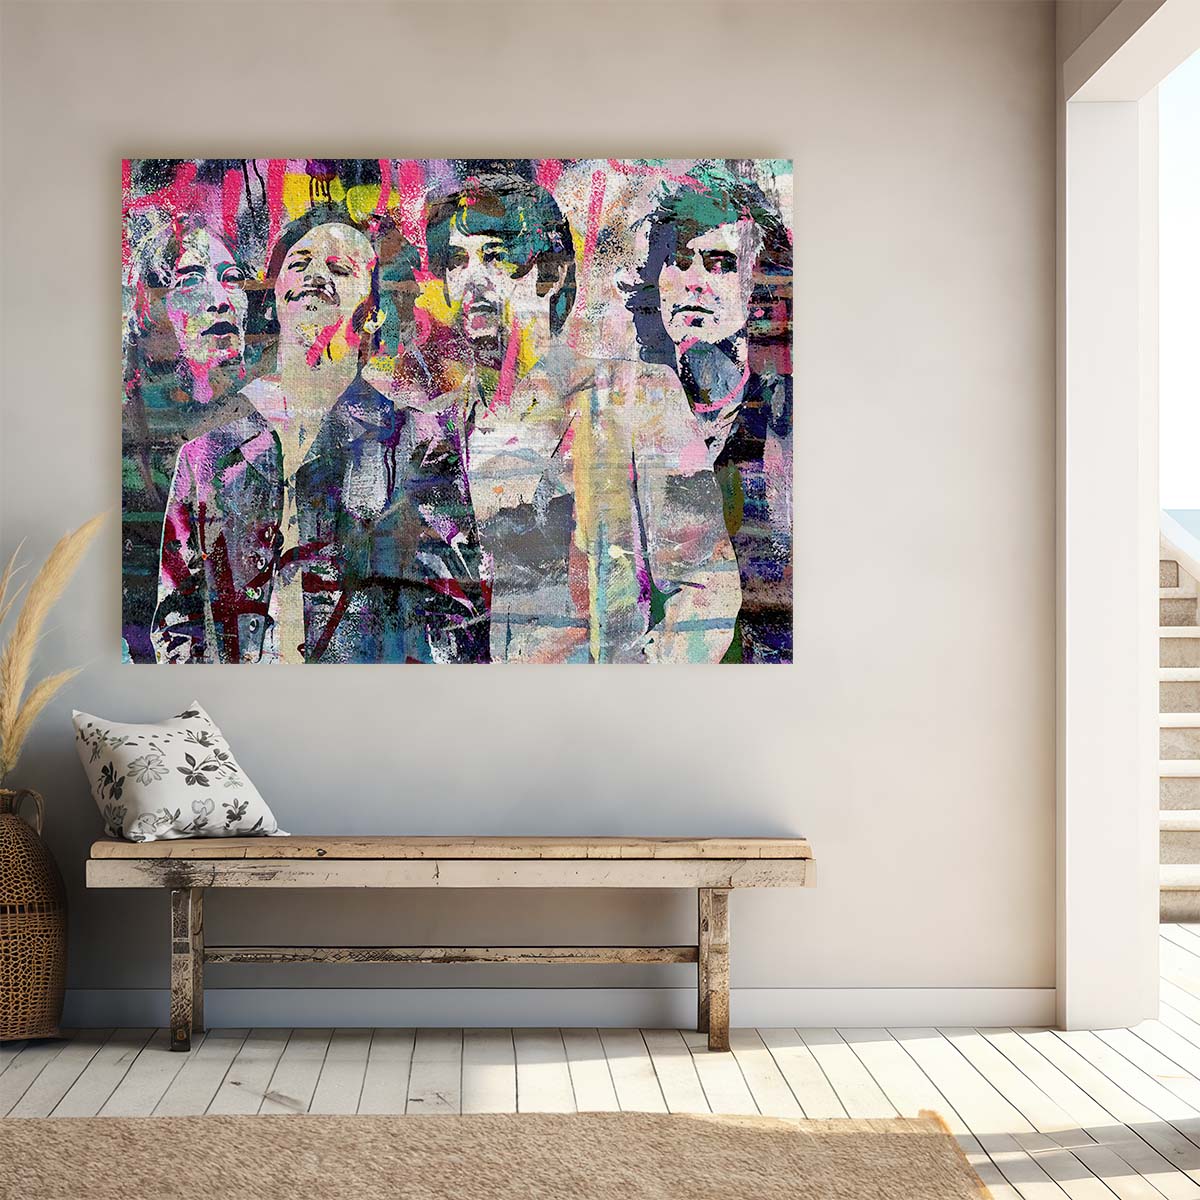 Beatles The Fab Four Graffiti Wall Art by Luxuriance Designs. Made in USA.